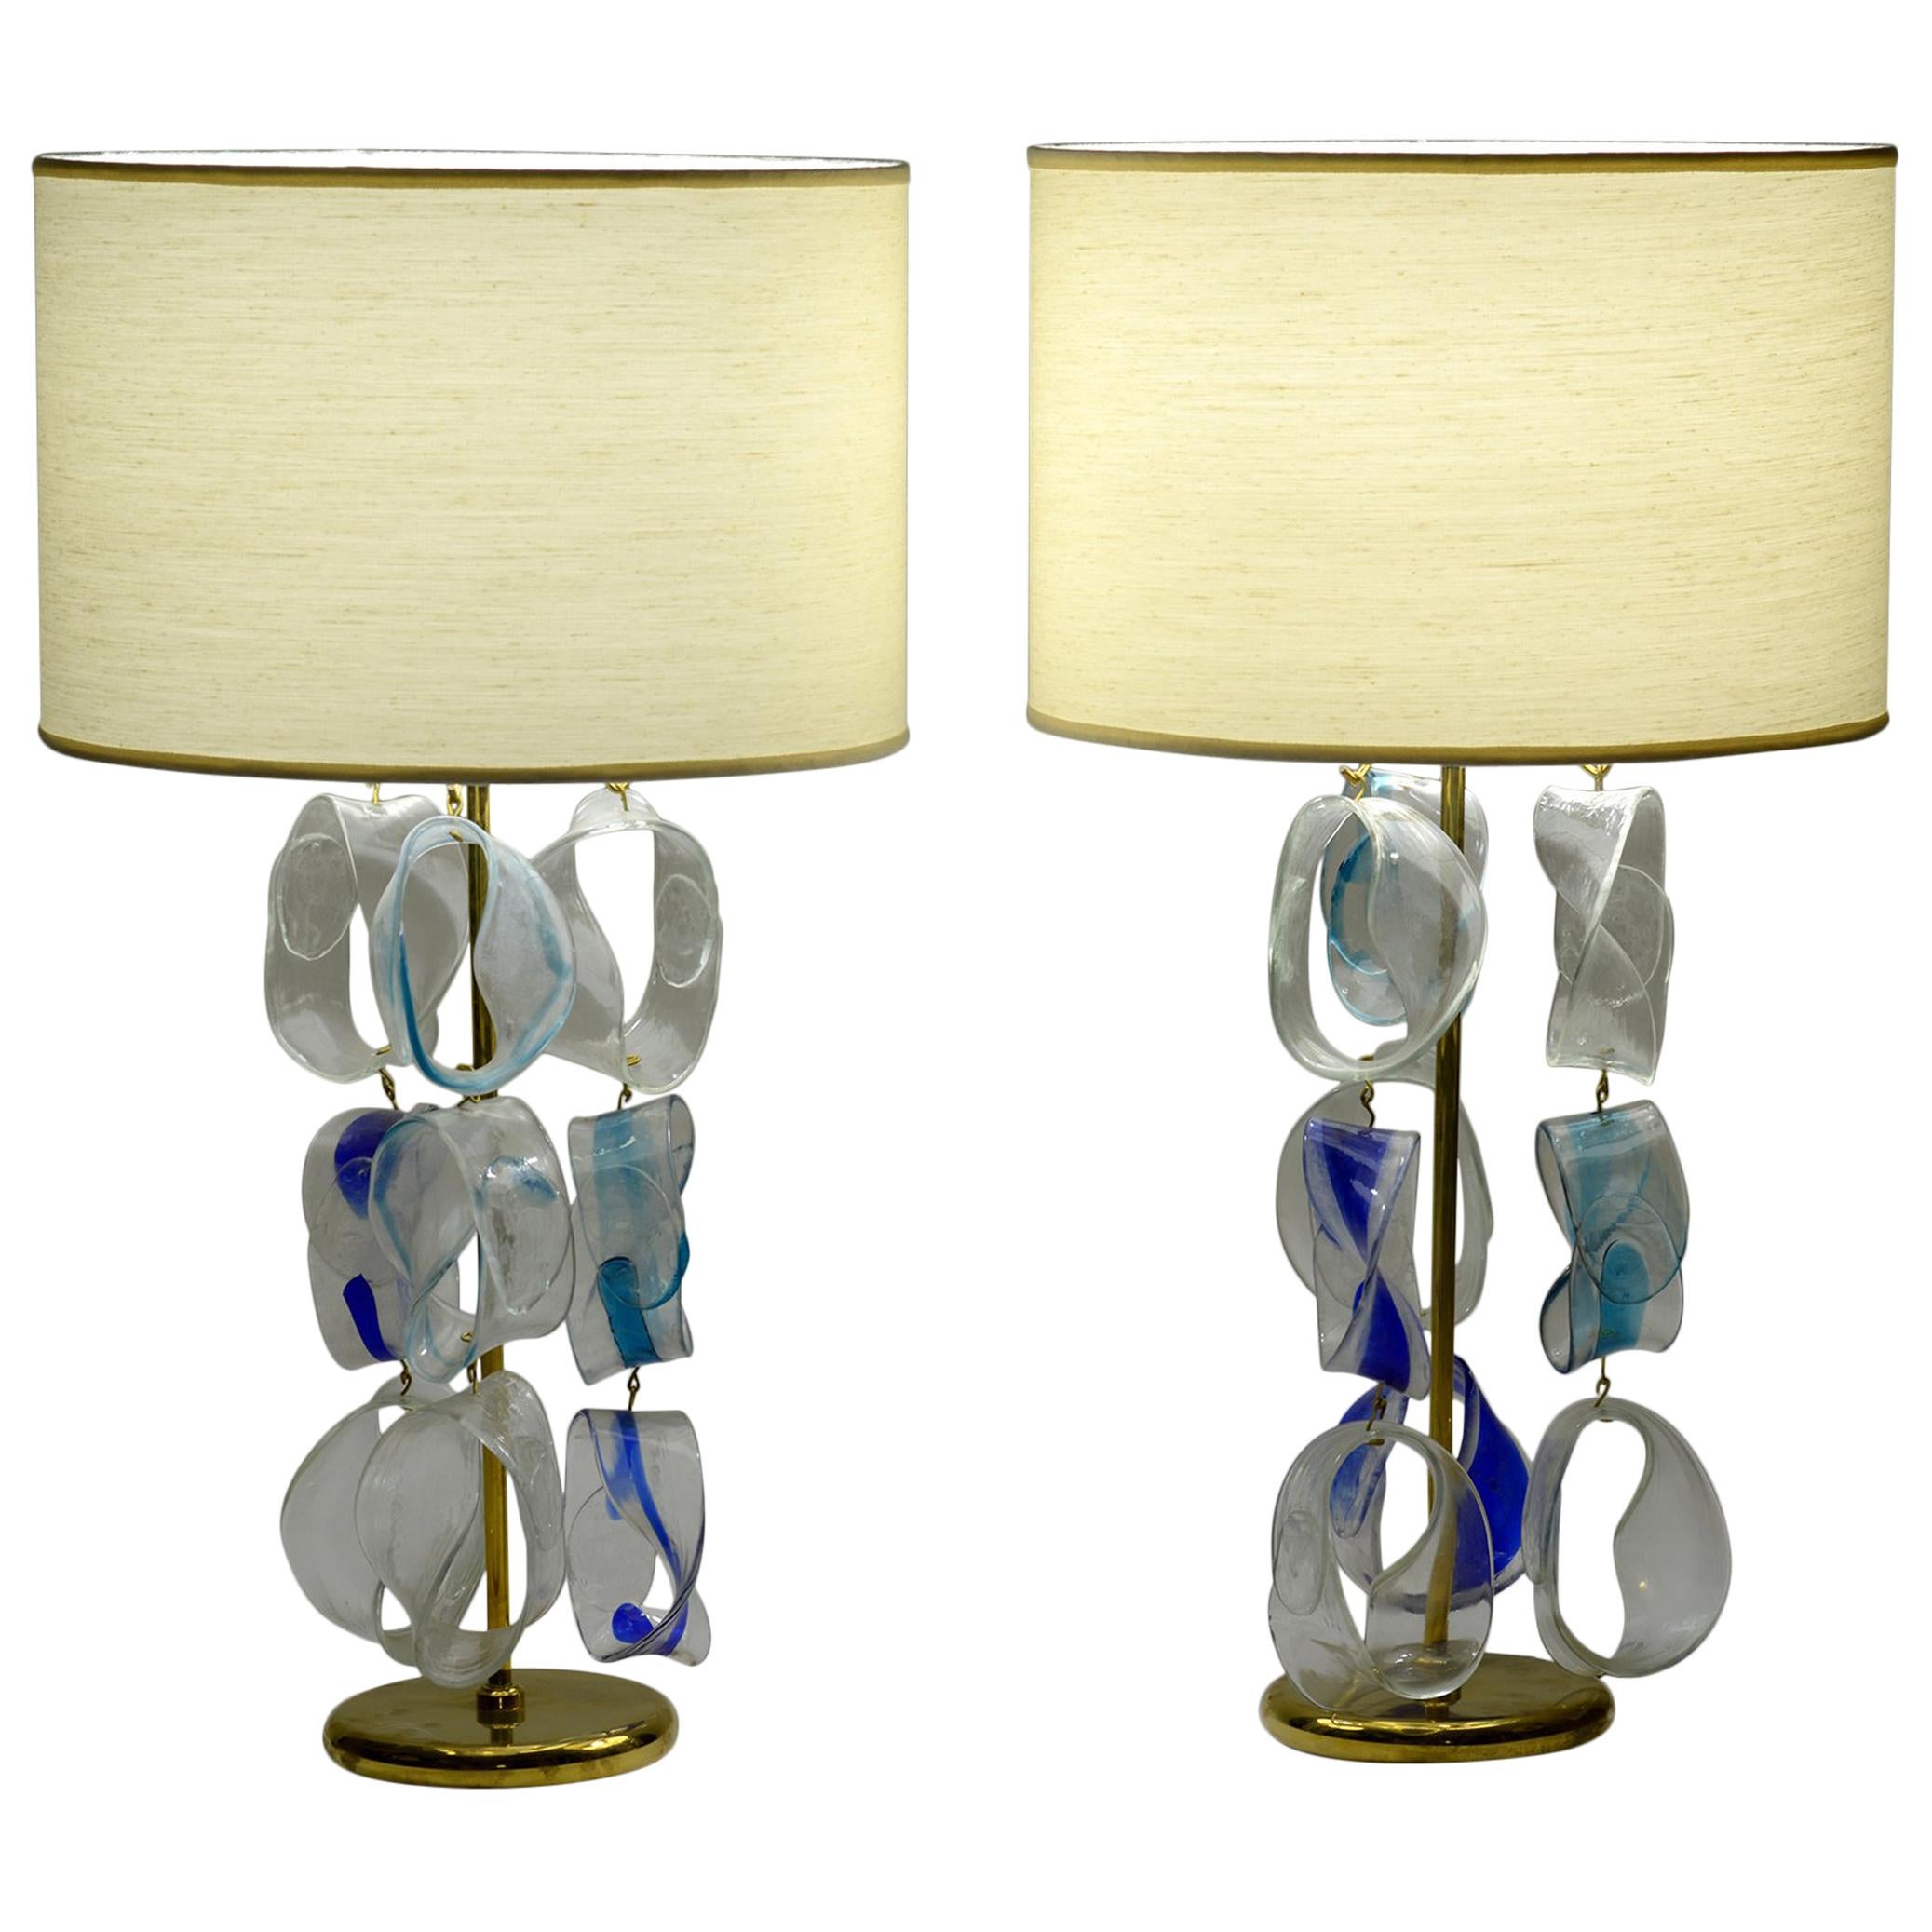 Mazzega Murano Midcentury Pair of Italian Glass and Brass Table Lamps, 1960 For Sale